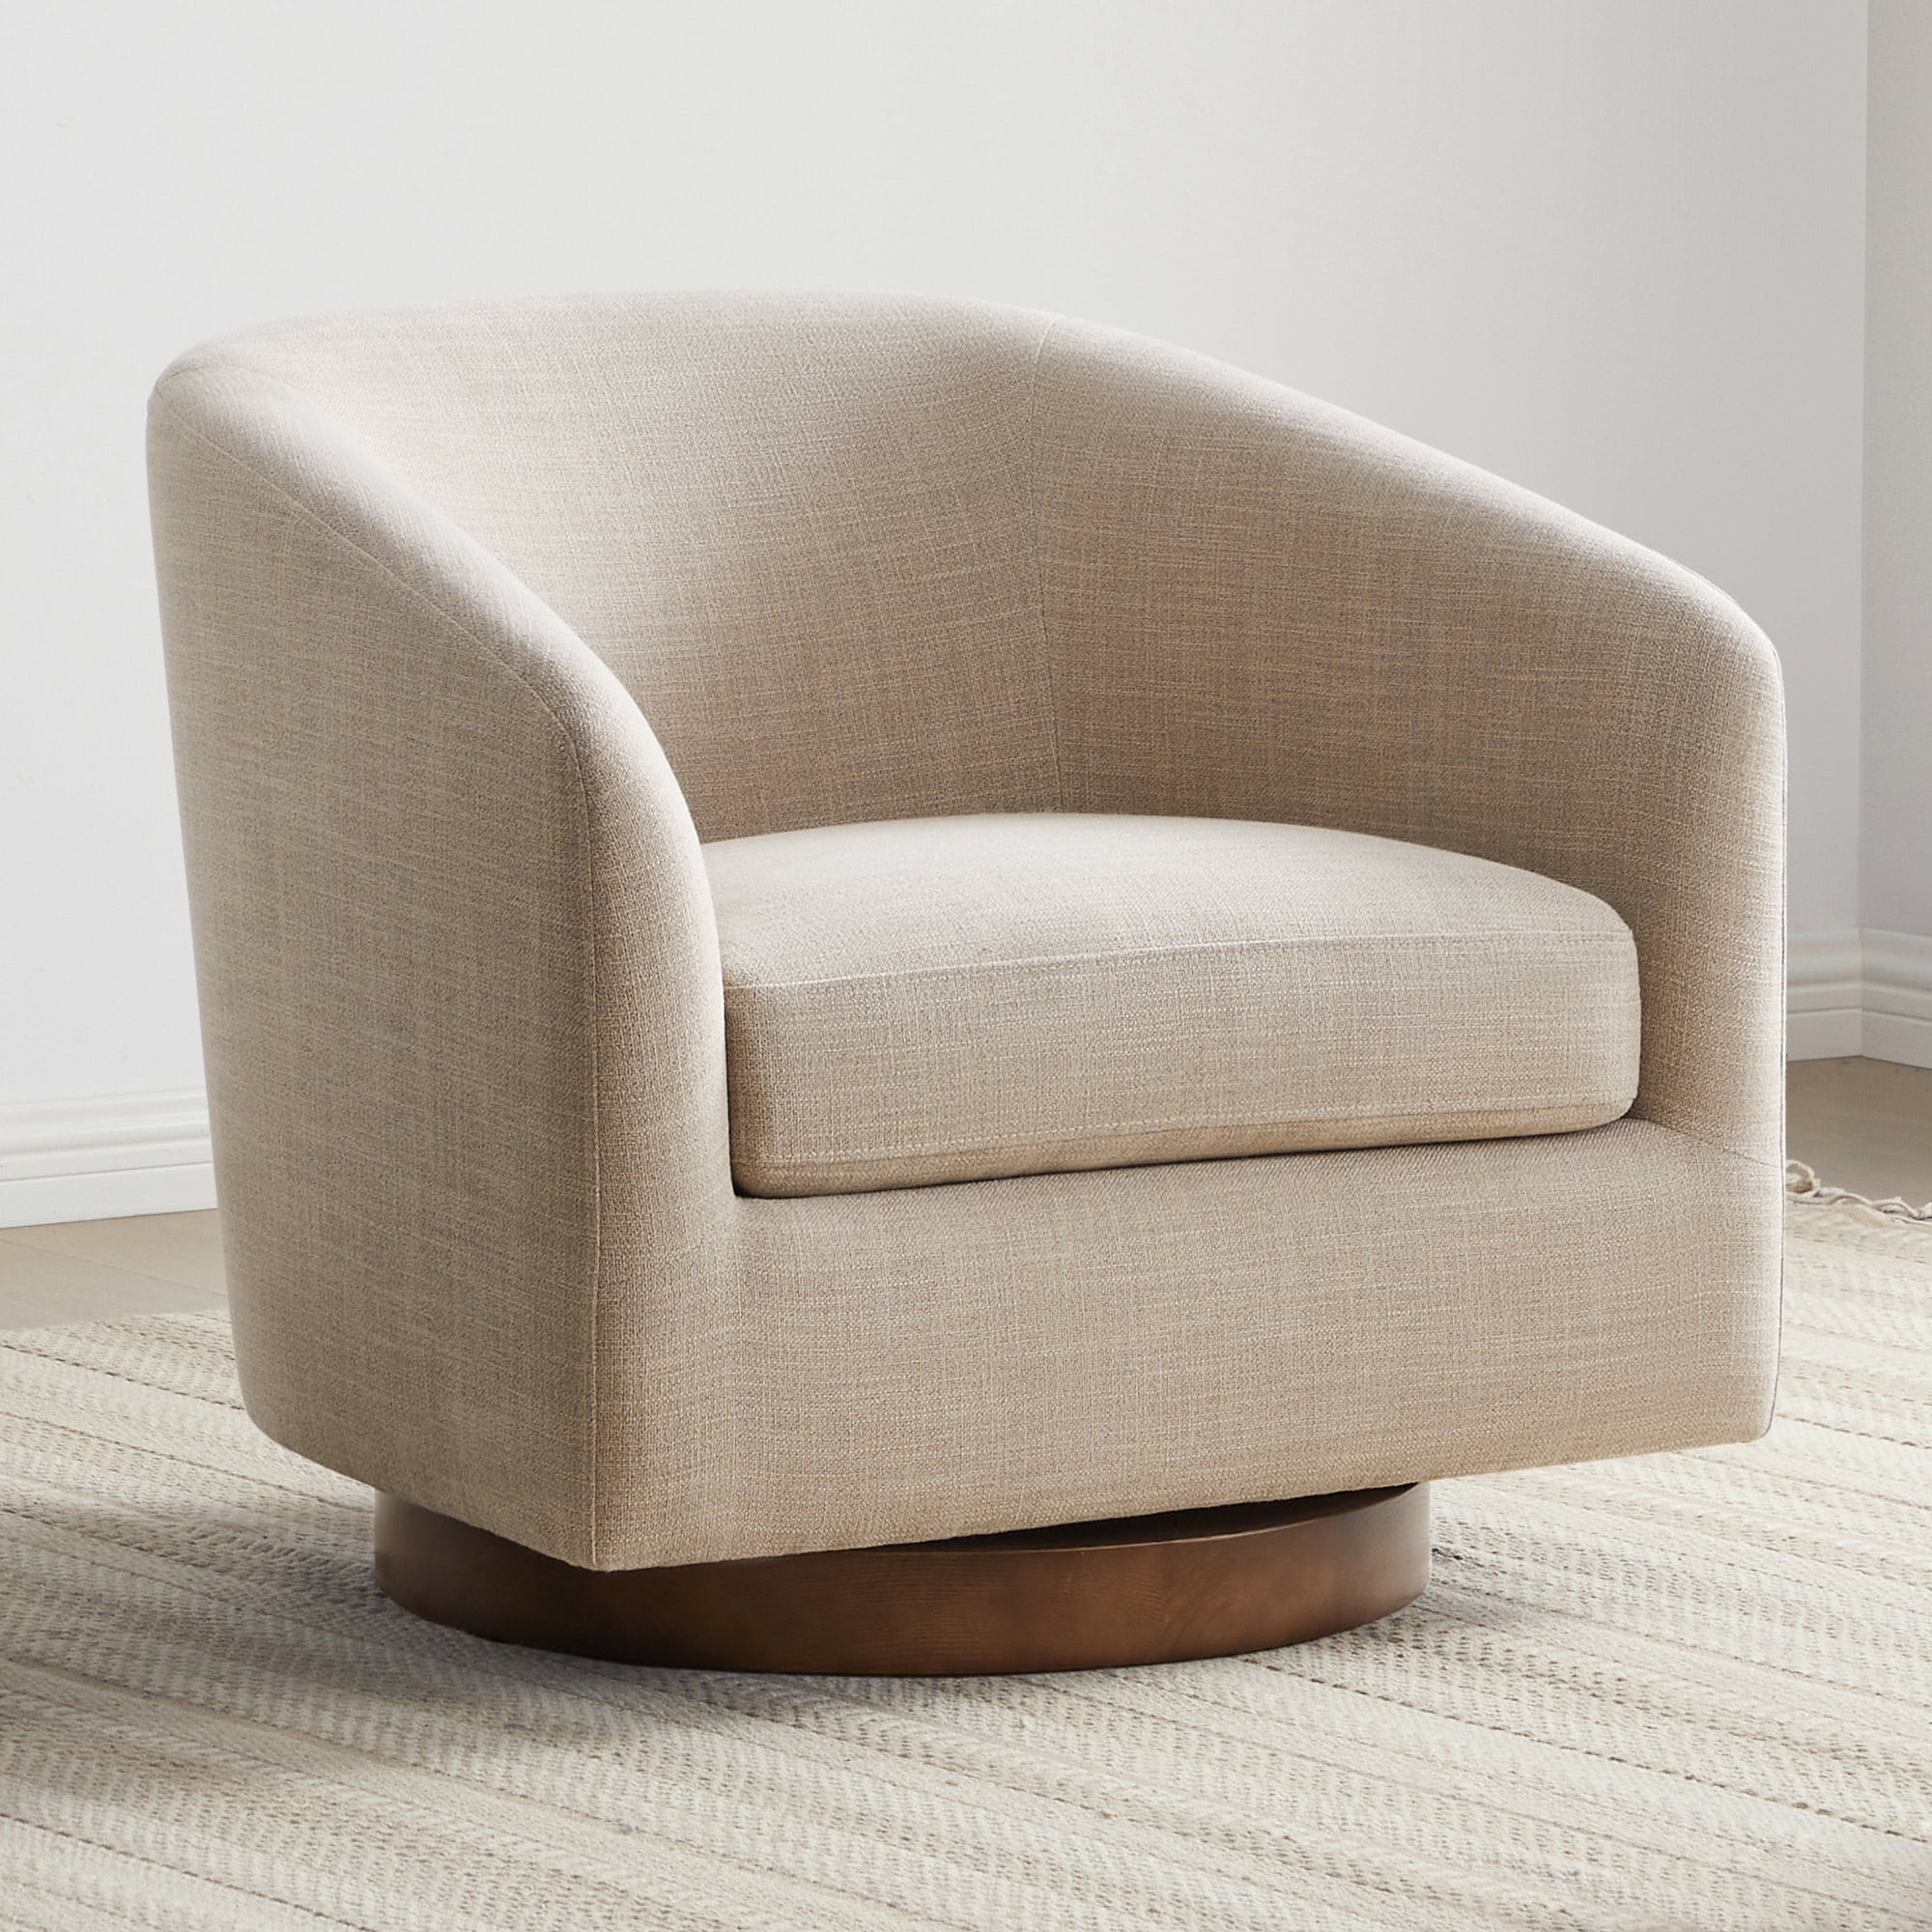 Round Barrel Swivel Chairs in Performance Fabric with Small Pillow